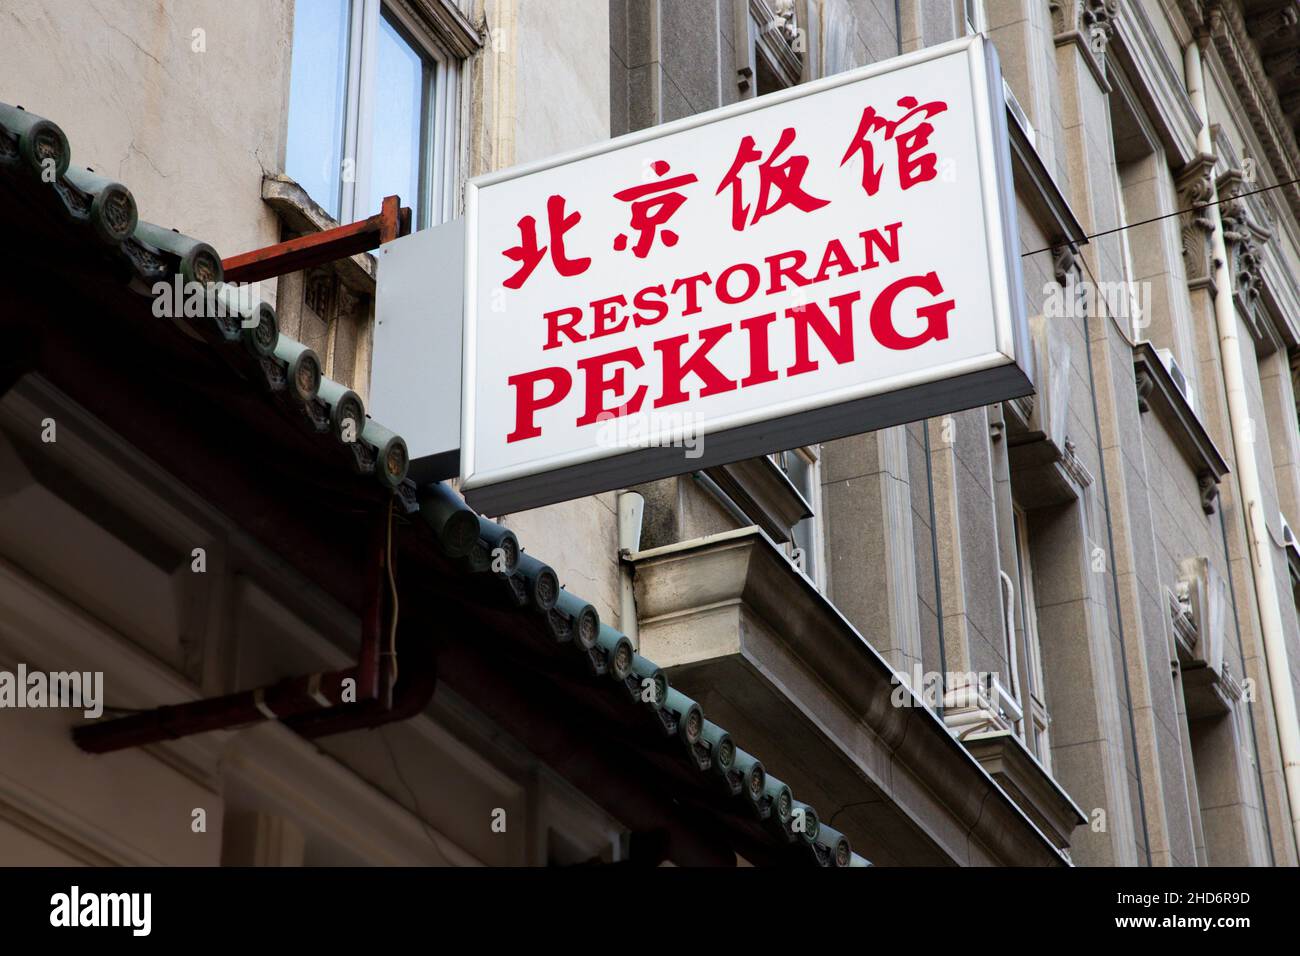 BELGRADE, Serbia - November 15, 2021 - Chinese restaurant sign with text in chinese and serbian language meaning (restaurant Beijing) in the streets Stock Photo